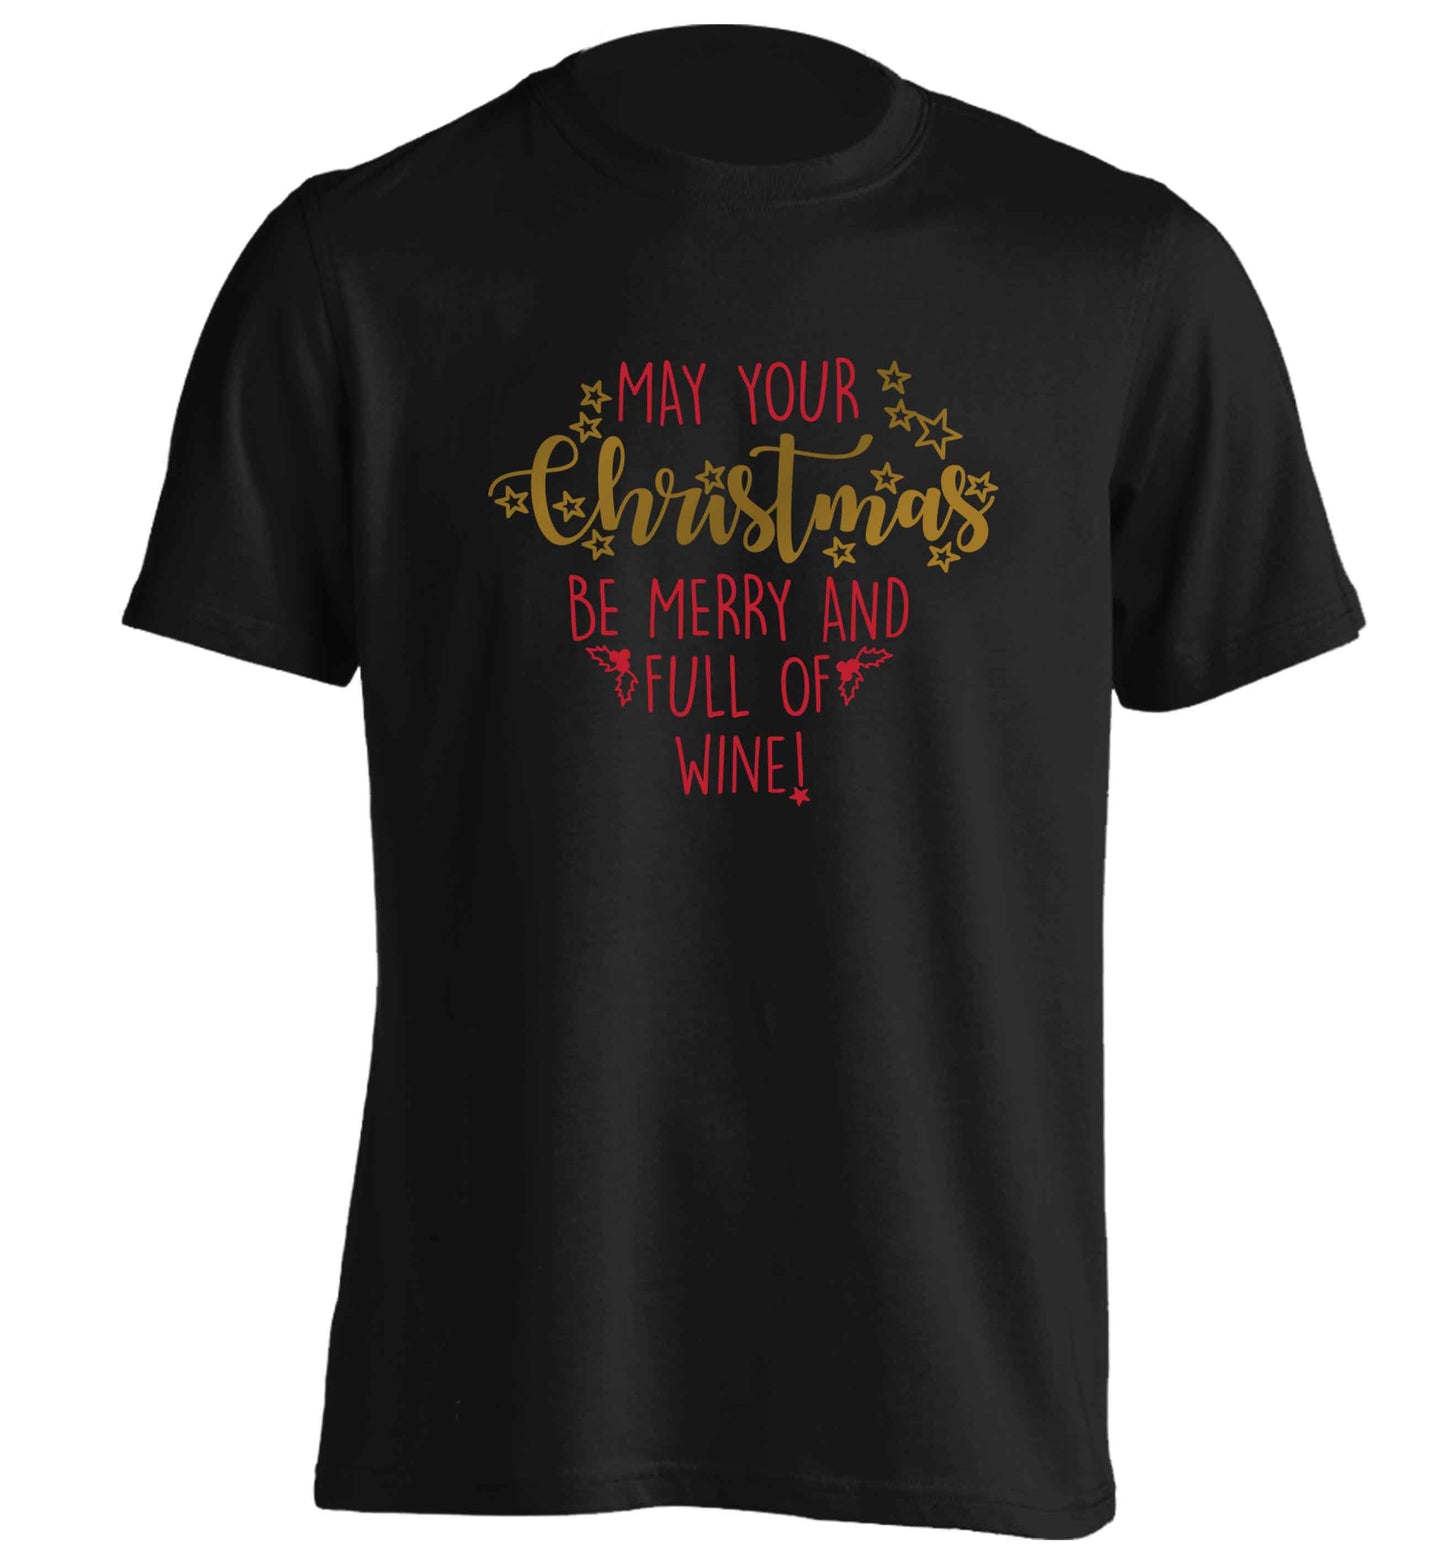 May your Christmas be merry and full of wine adults unisex black Tshirt 2XL